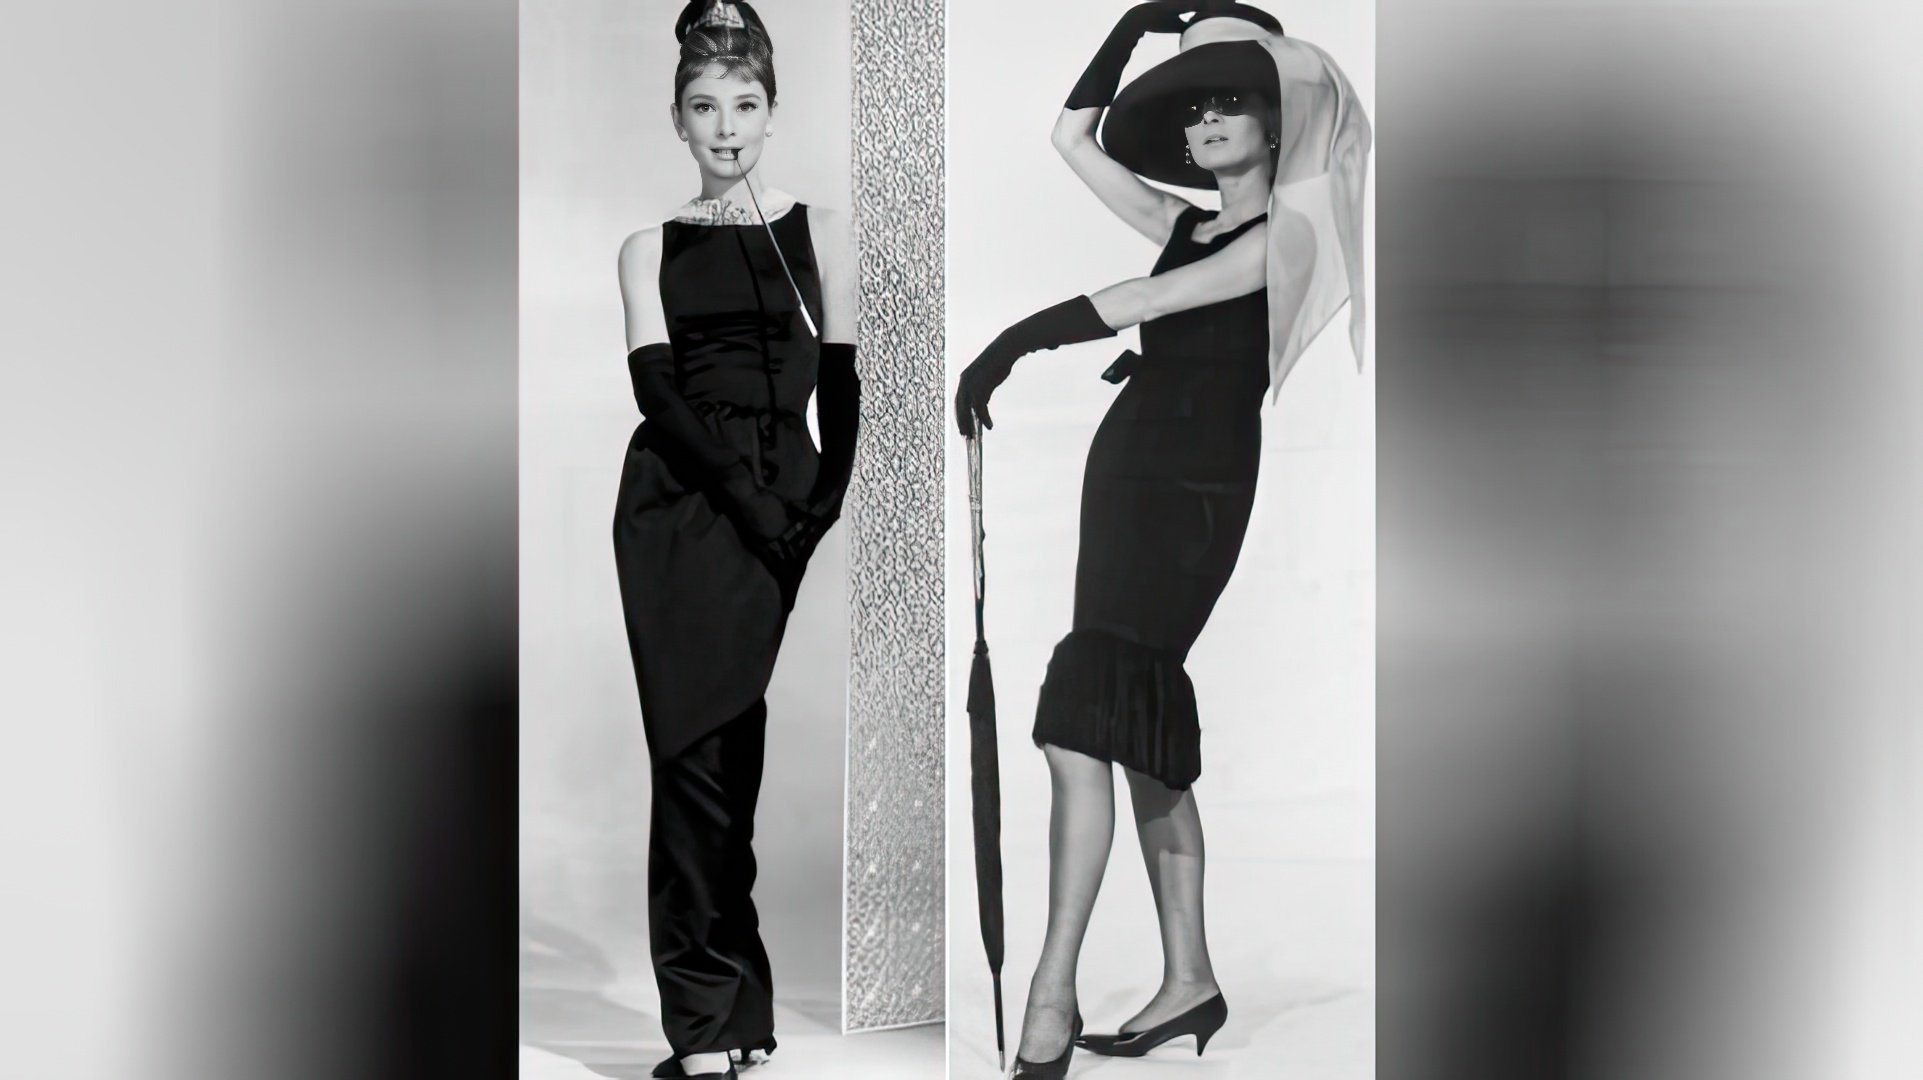 Audrey Hepburn became a style icon for millions of women